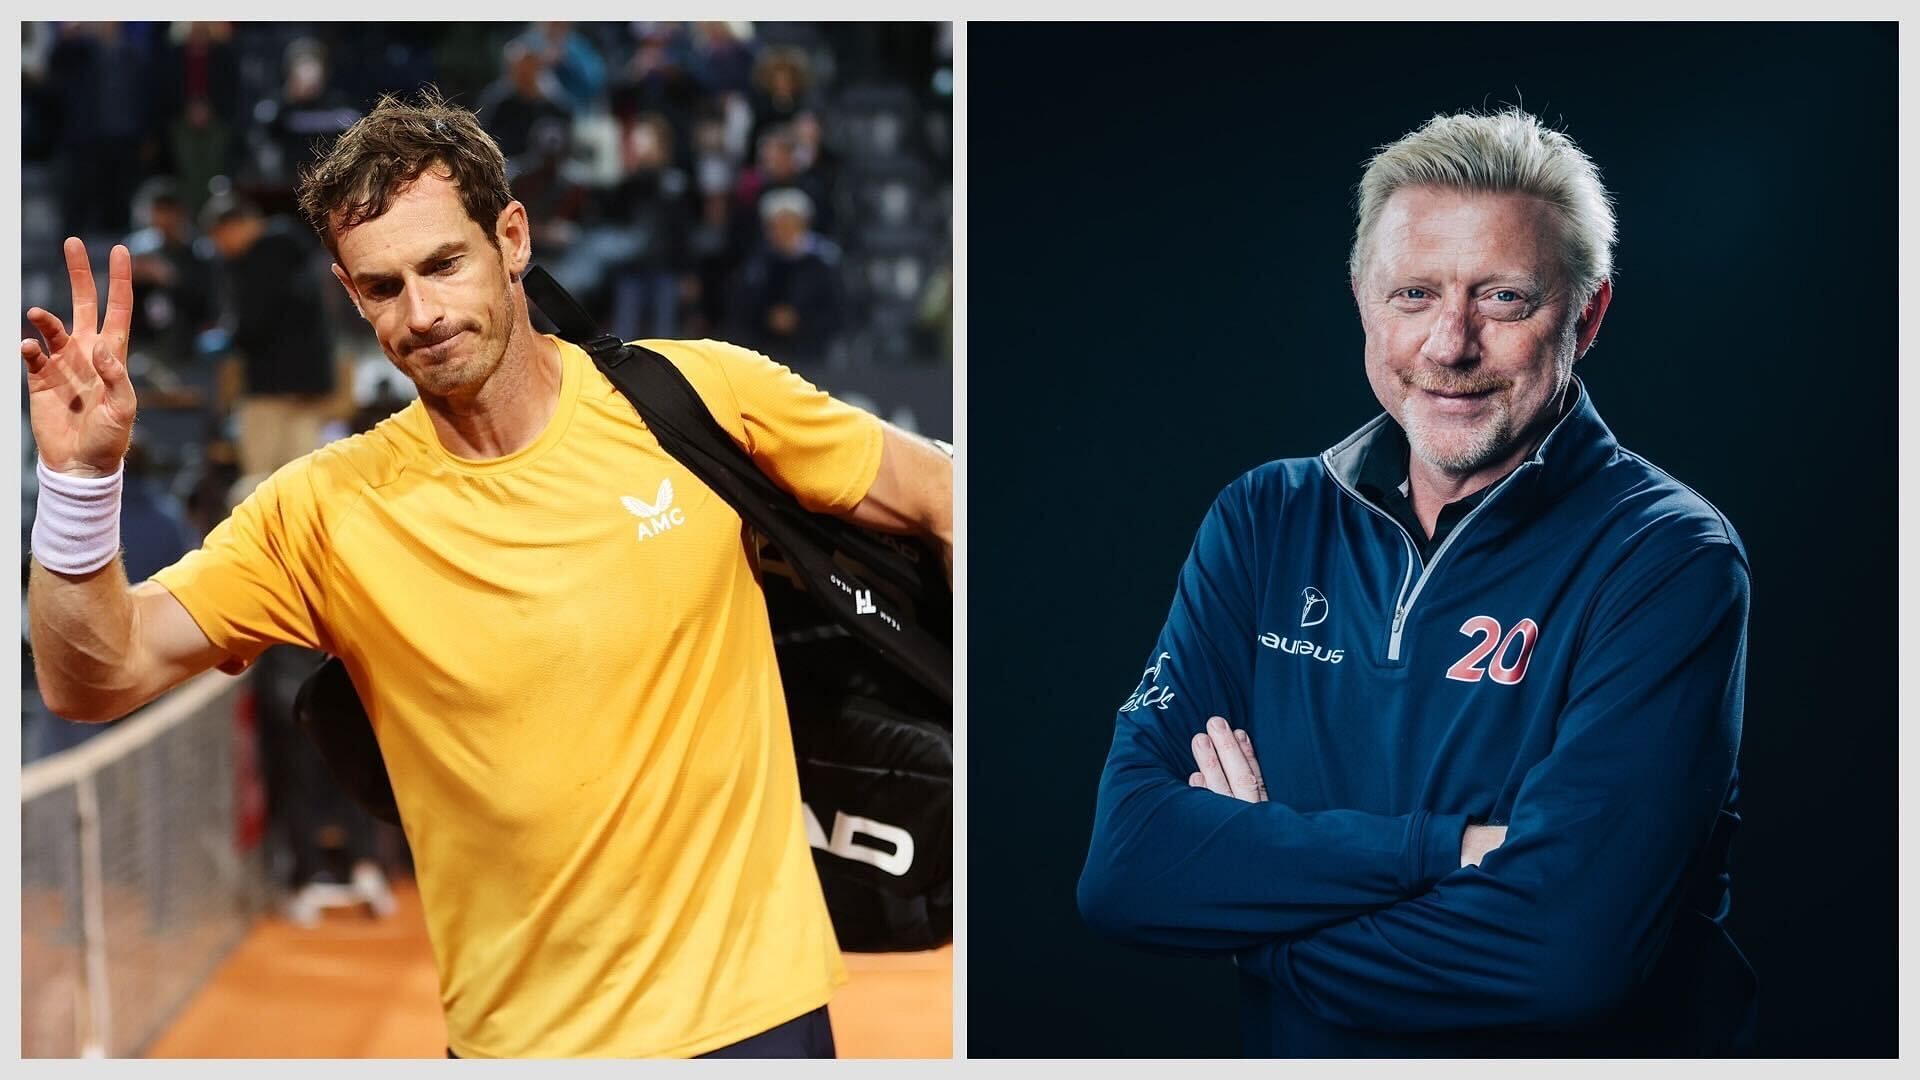 Andy Murray shared his idea of watching Boris Becker against current top players